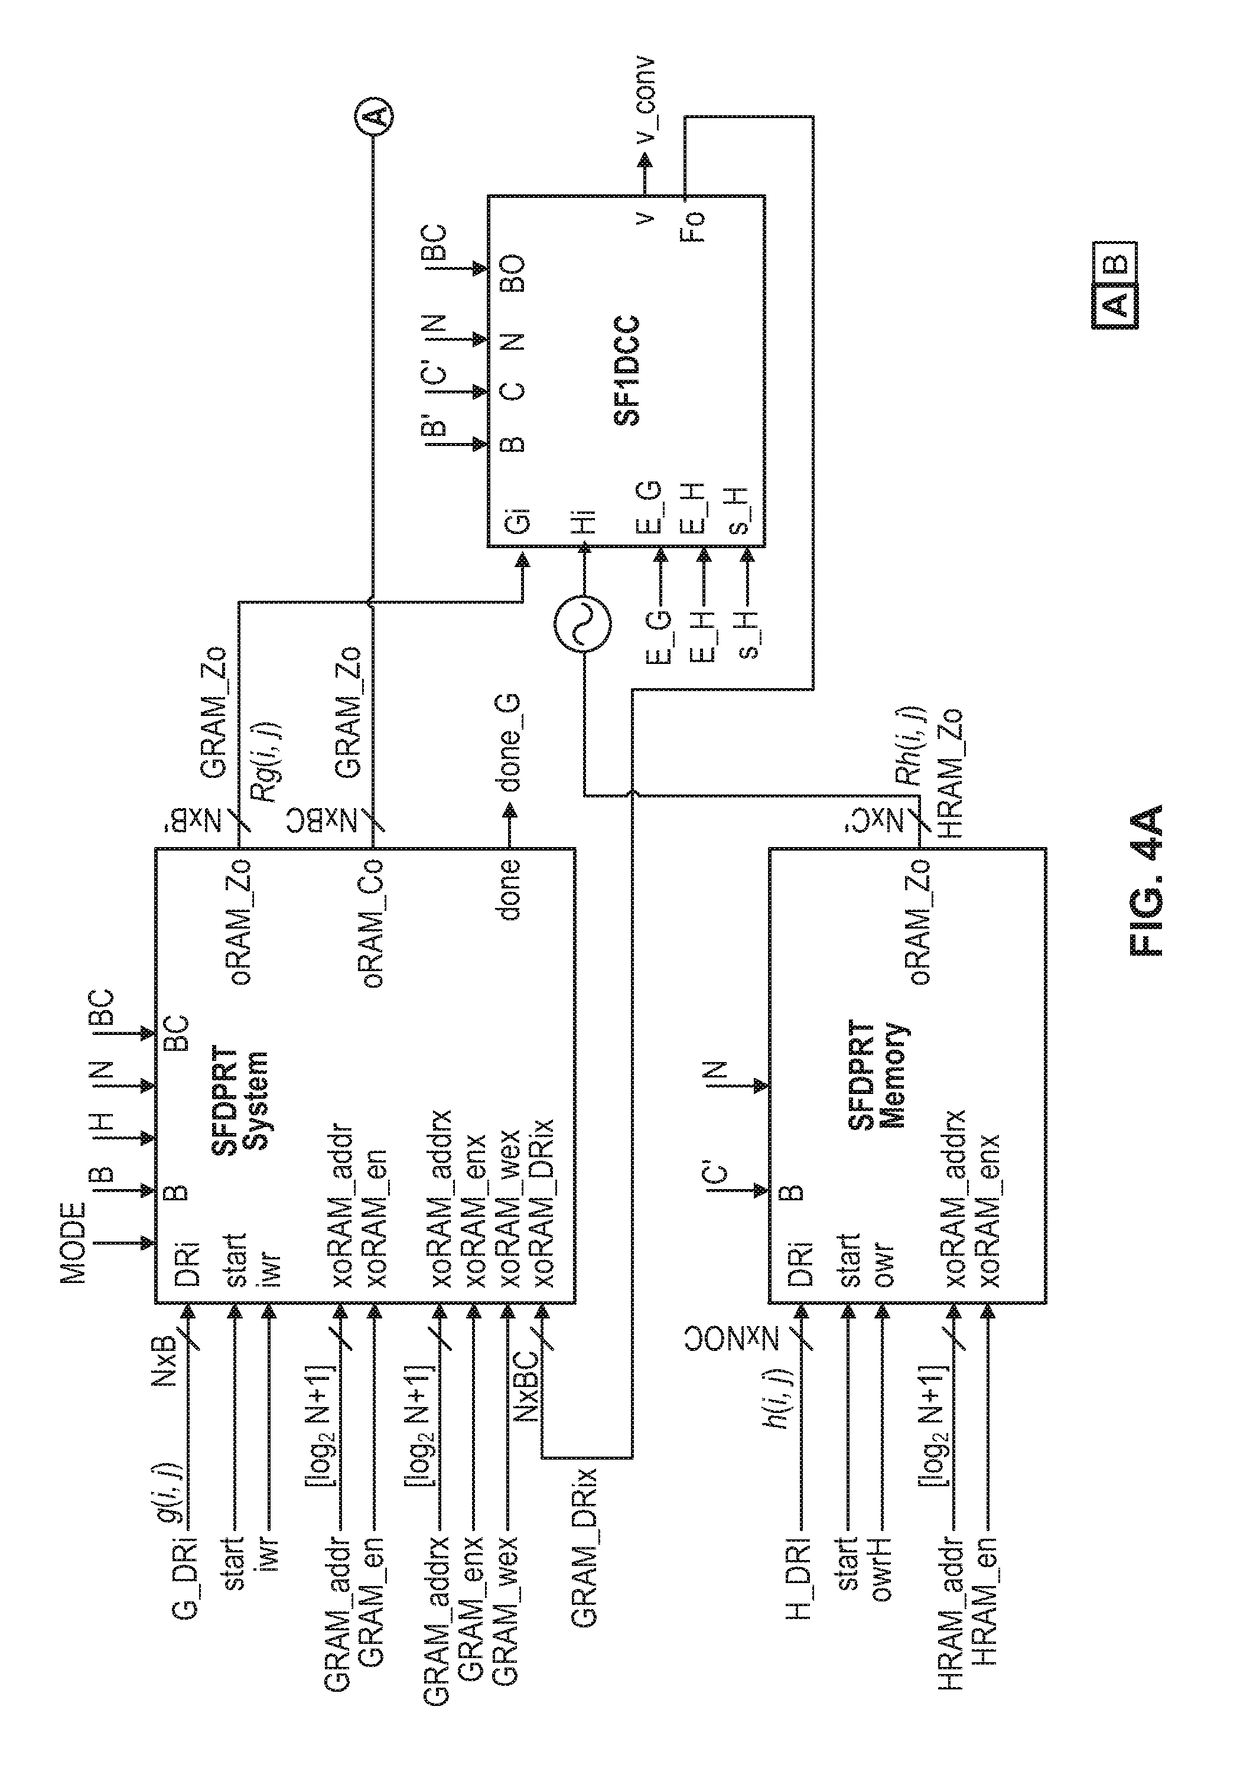 System and methods for computing 2-d convolutions and cross-correlations